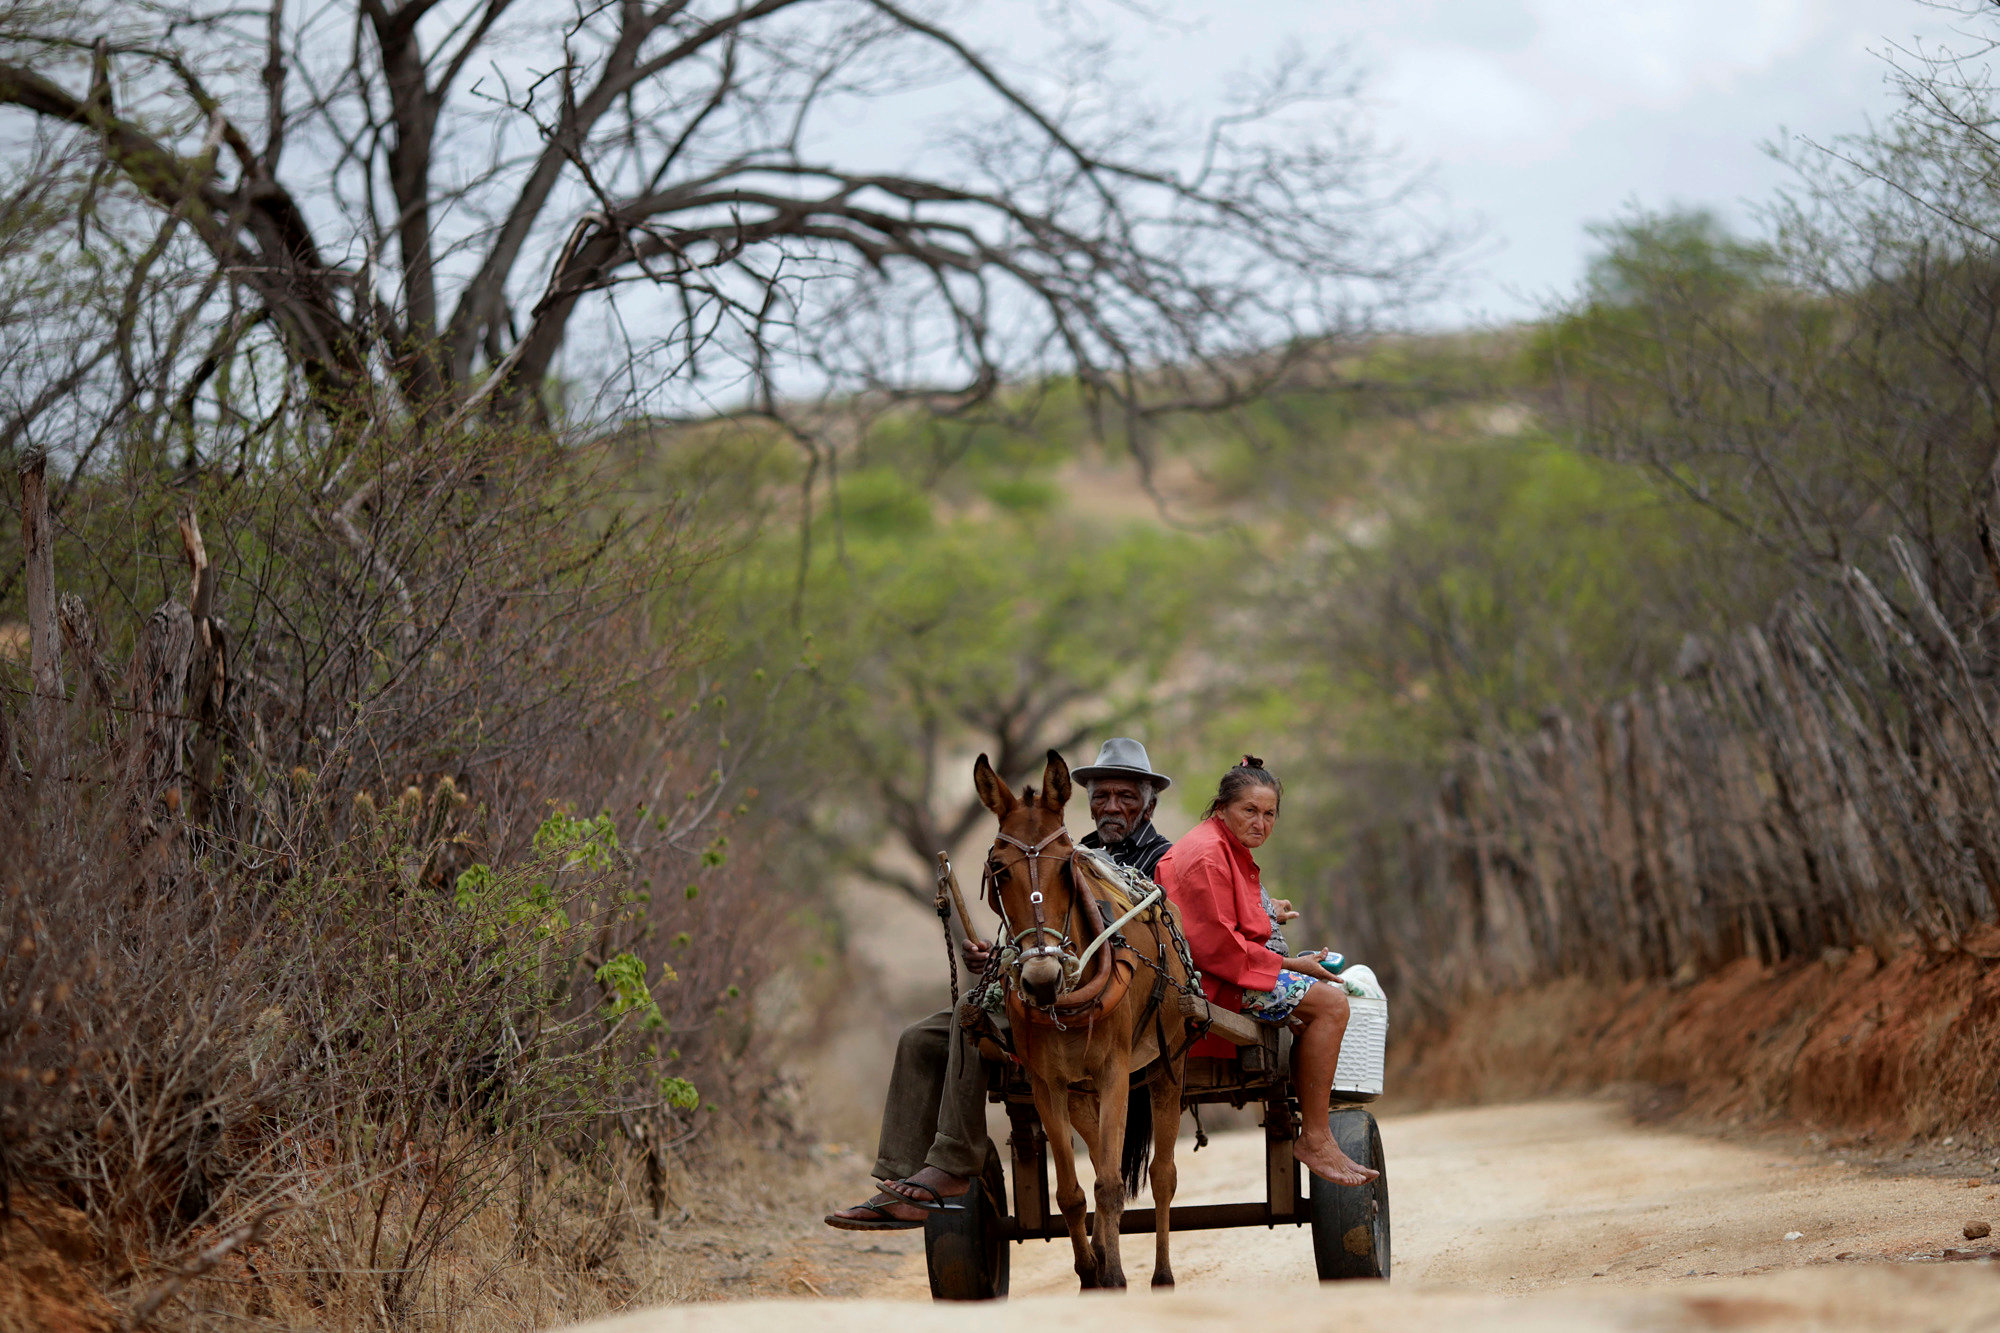 Francisco Barbosa Cruz (L), 82, and his wife Maria de Lourdes, 65, ride on a horse carriage in Pombal, Paraiba state, Brazil, February 11, 2017. REUTERS/Ueslei Marcelino